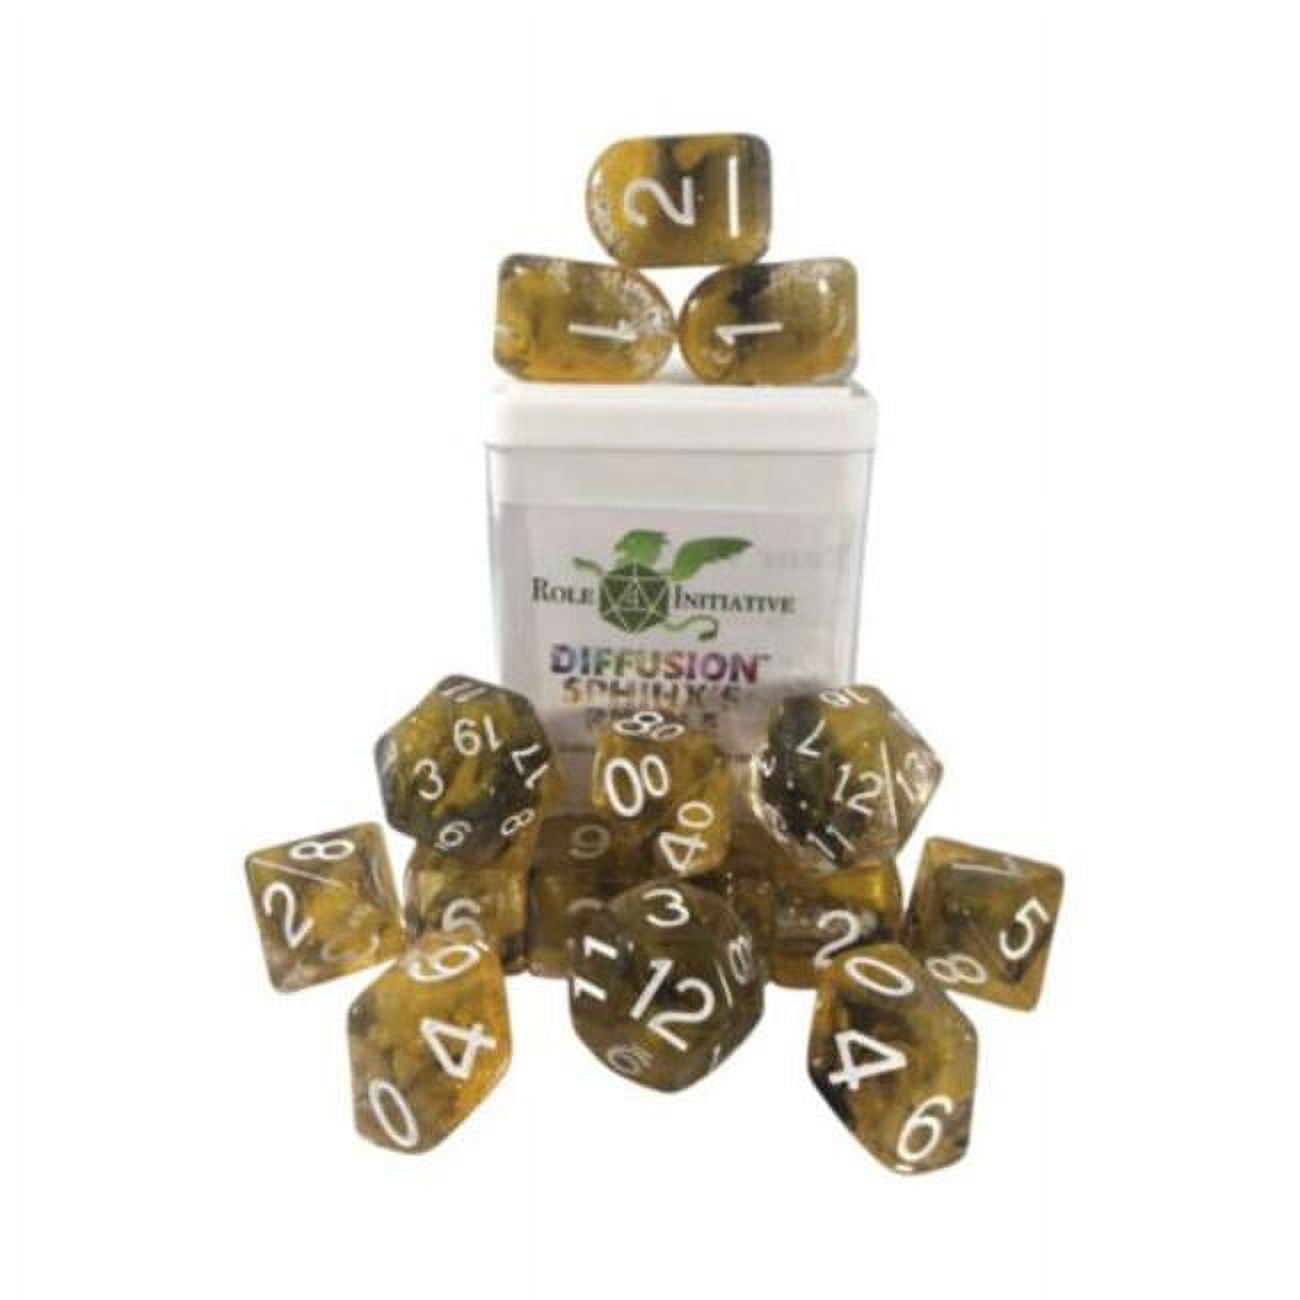 Picture of Role 4 Initiative R4I50538-FC-S Diffusion Sphinxs Riddle SPR Dice, Set of 15